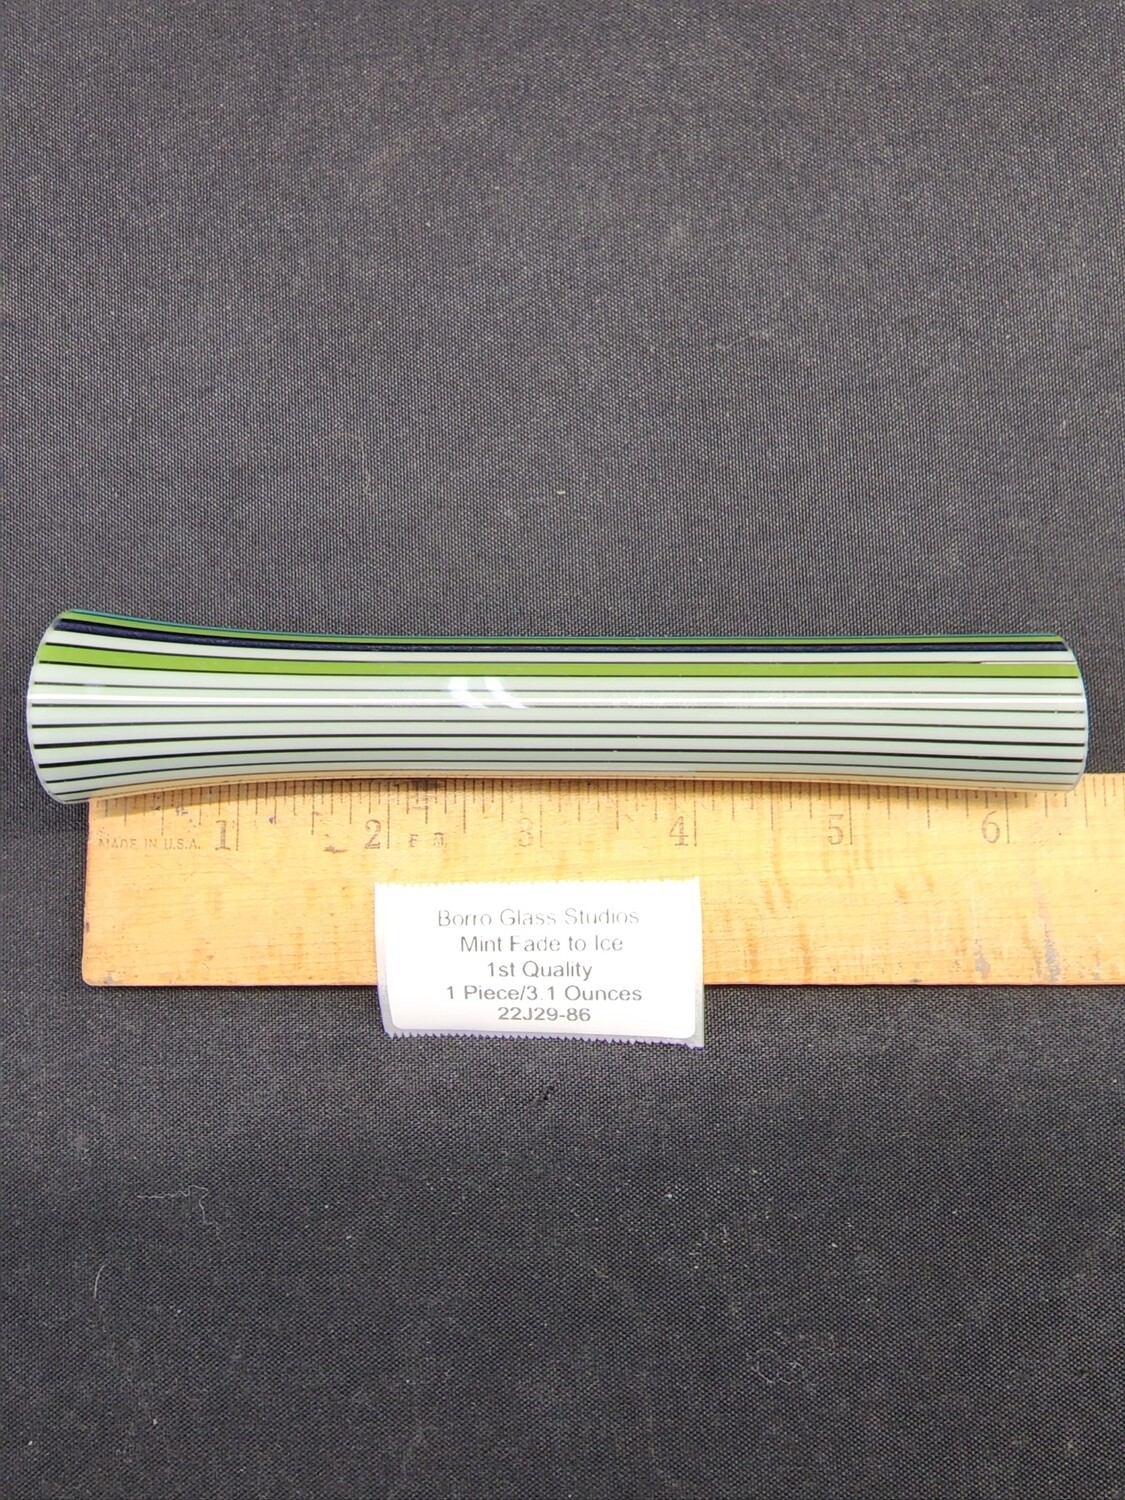 Mint Fade to Ice Boro Vac Stacked Line Tubing - 1st Quality - 3.1 Ounces